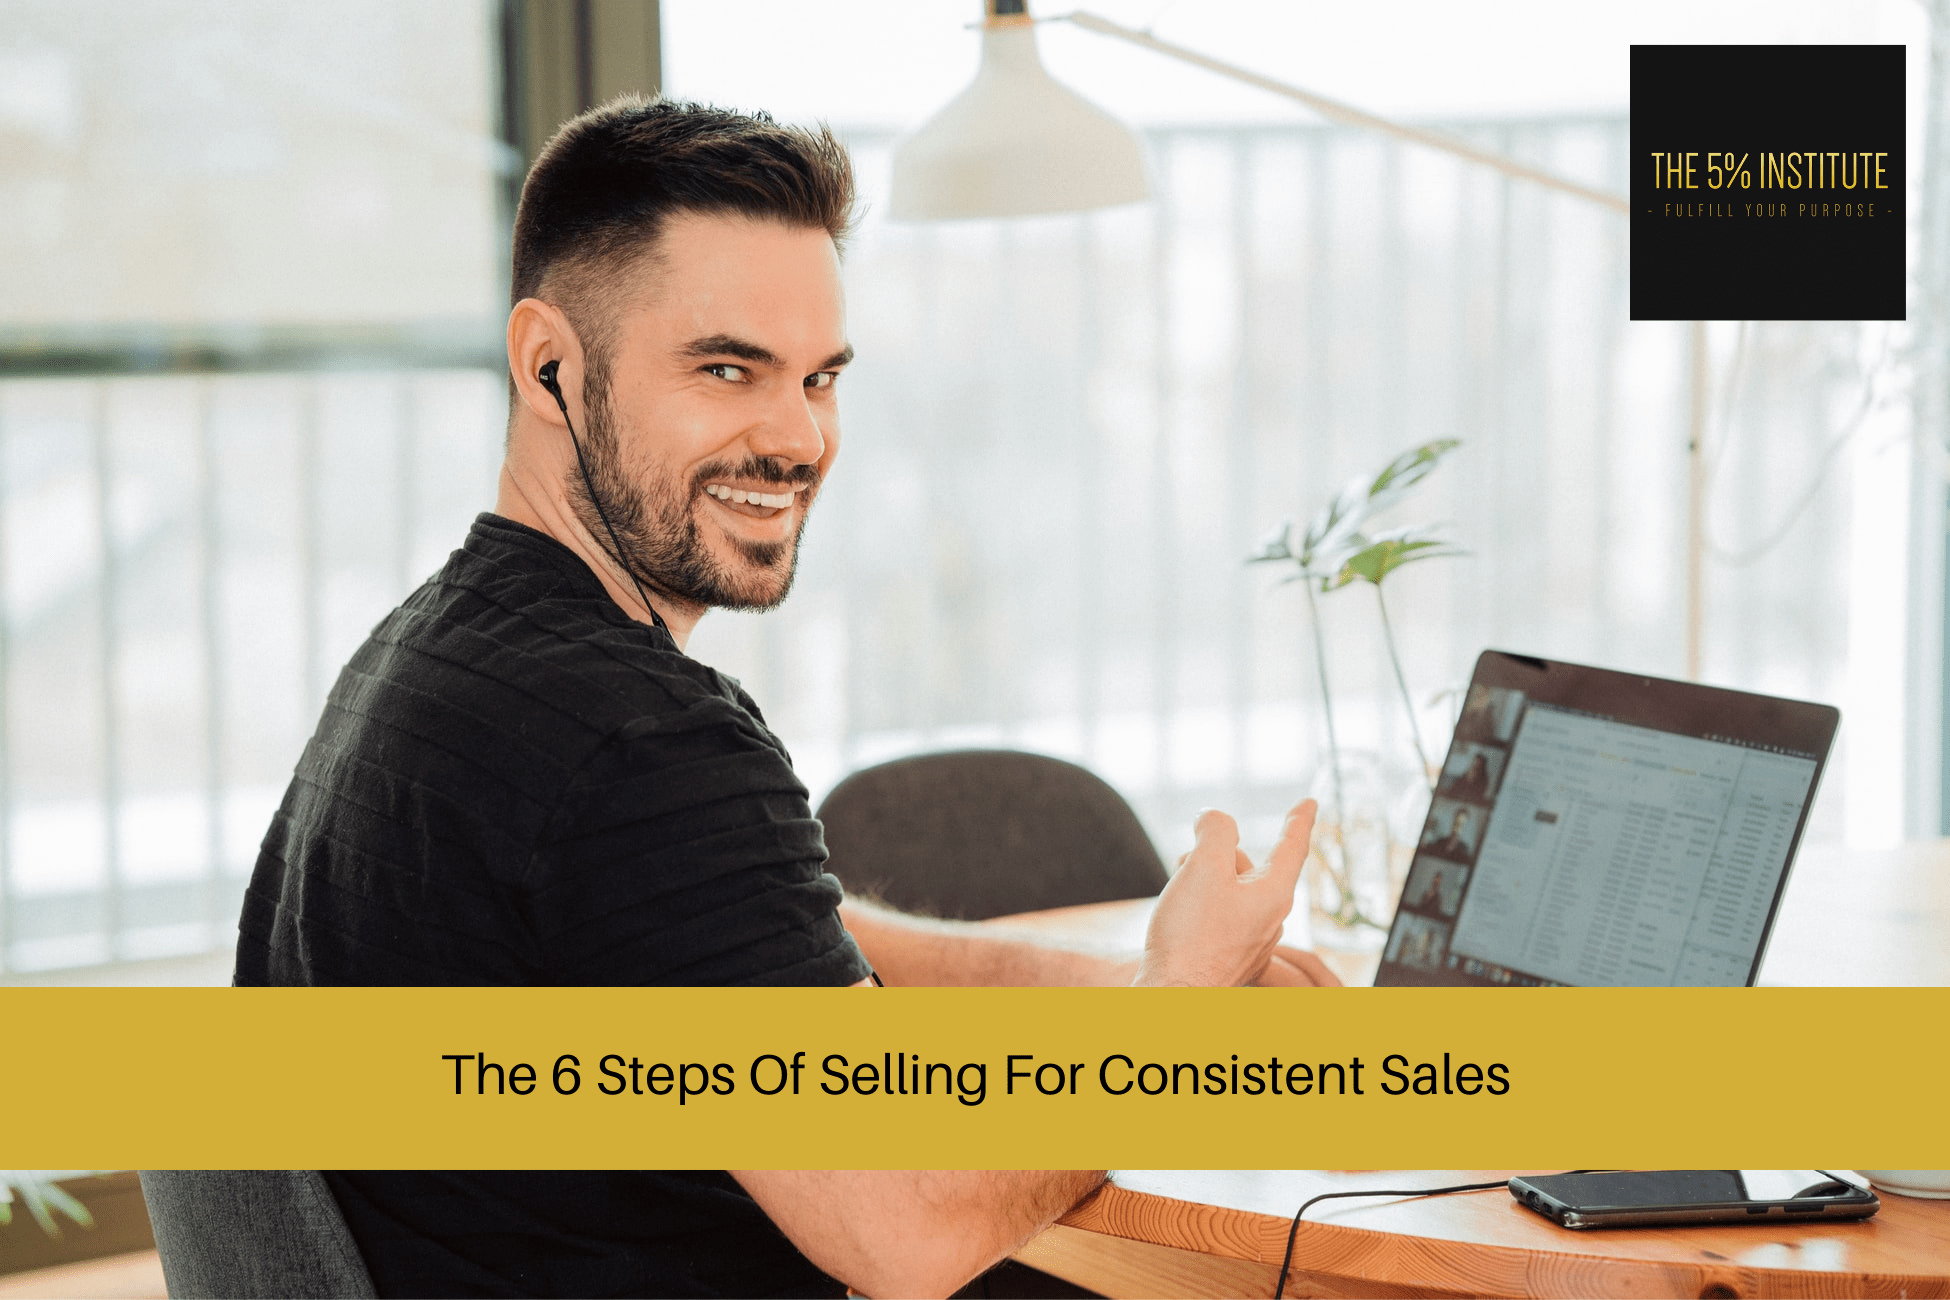 The 6 Steps Of Selling For Consistent Sales